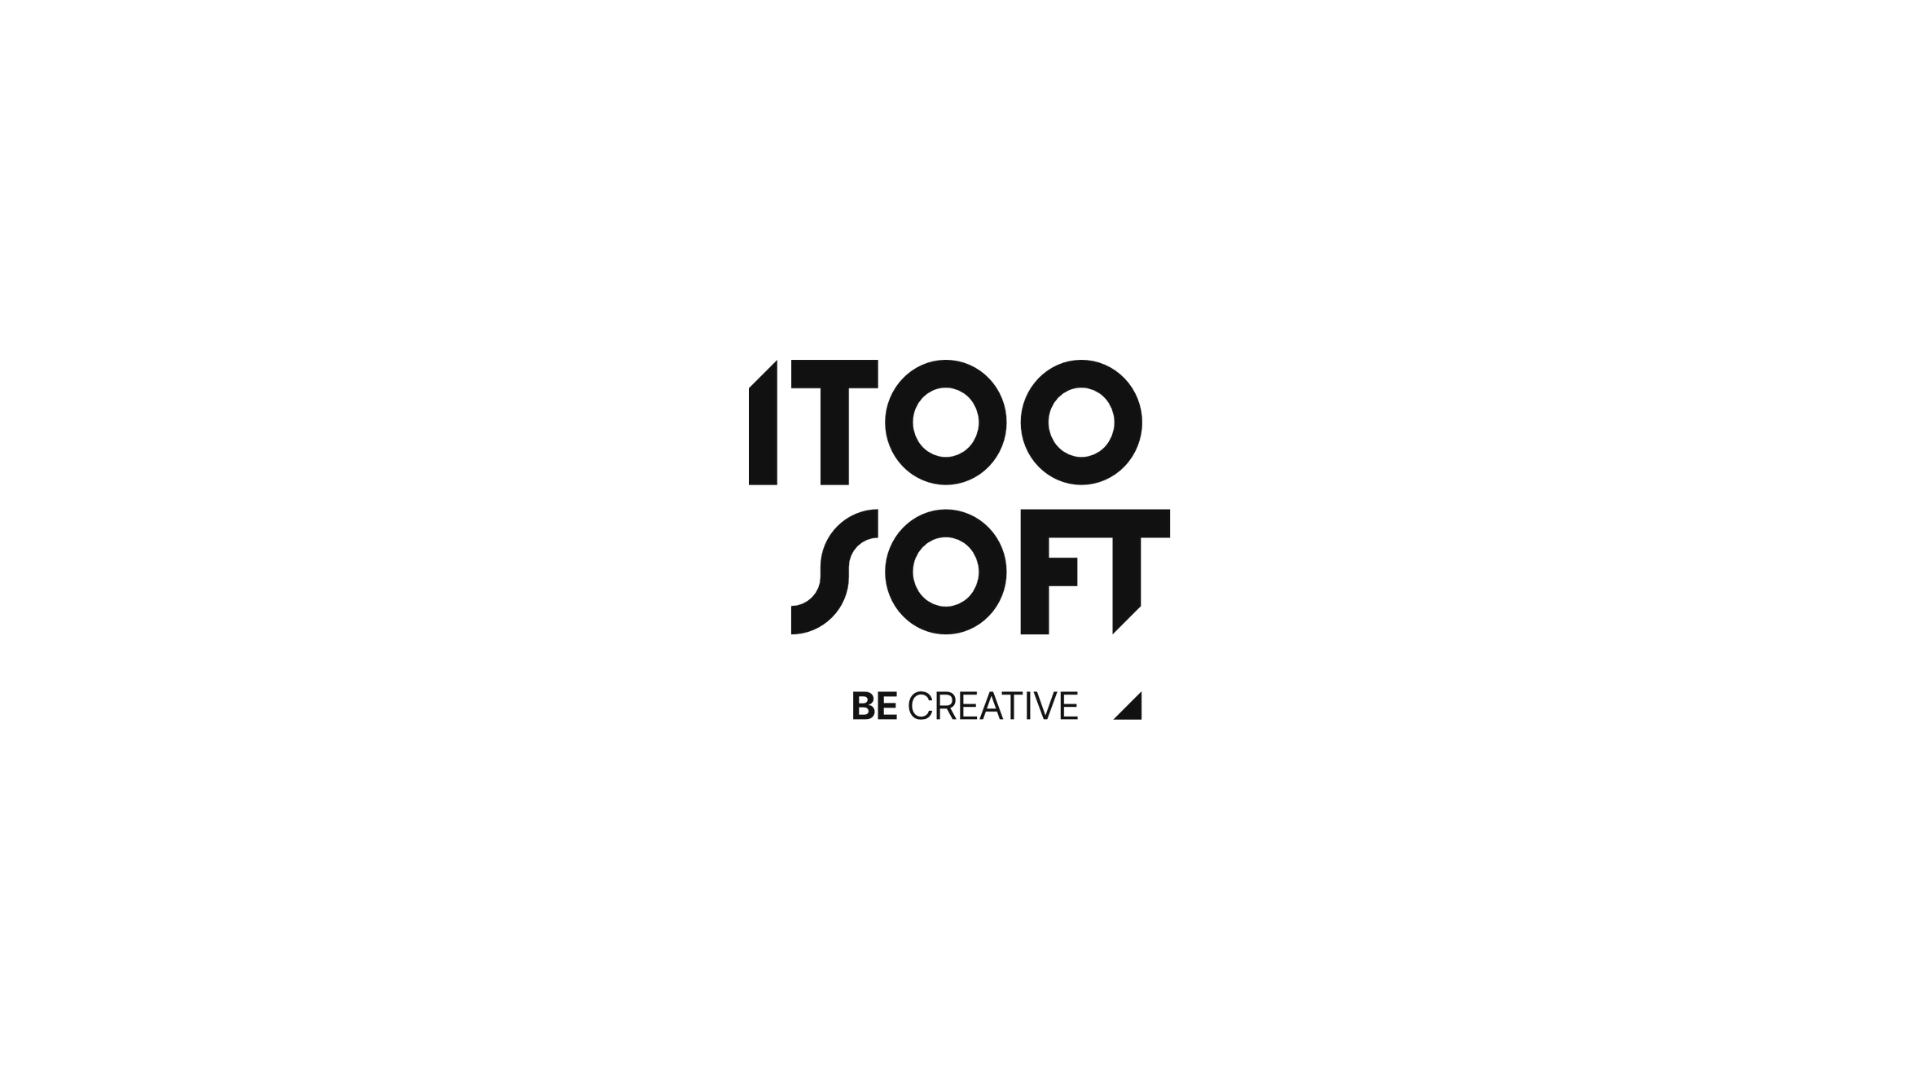 iToo Software